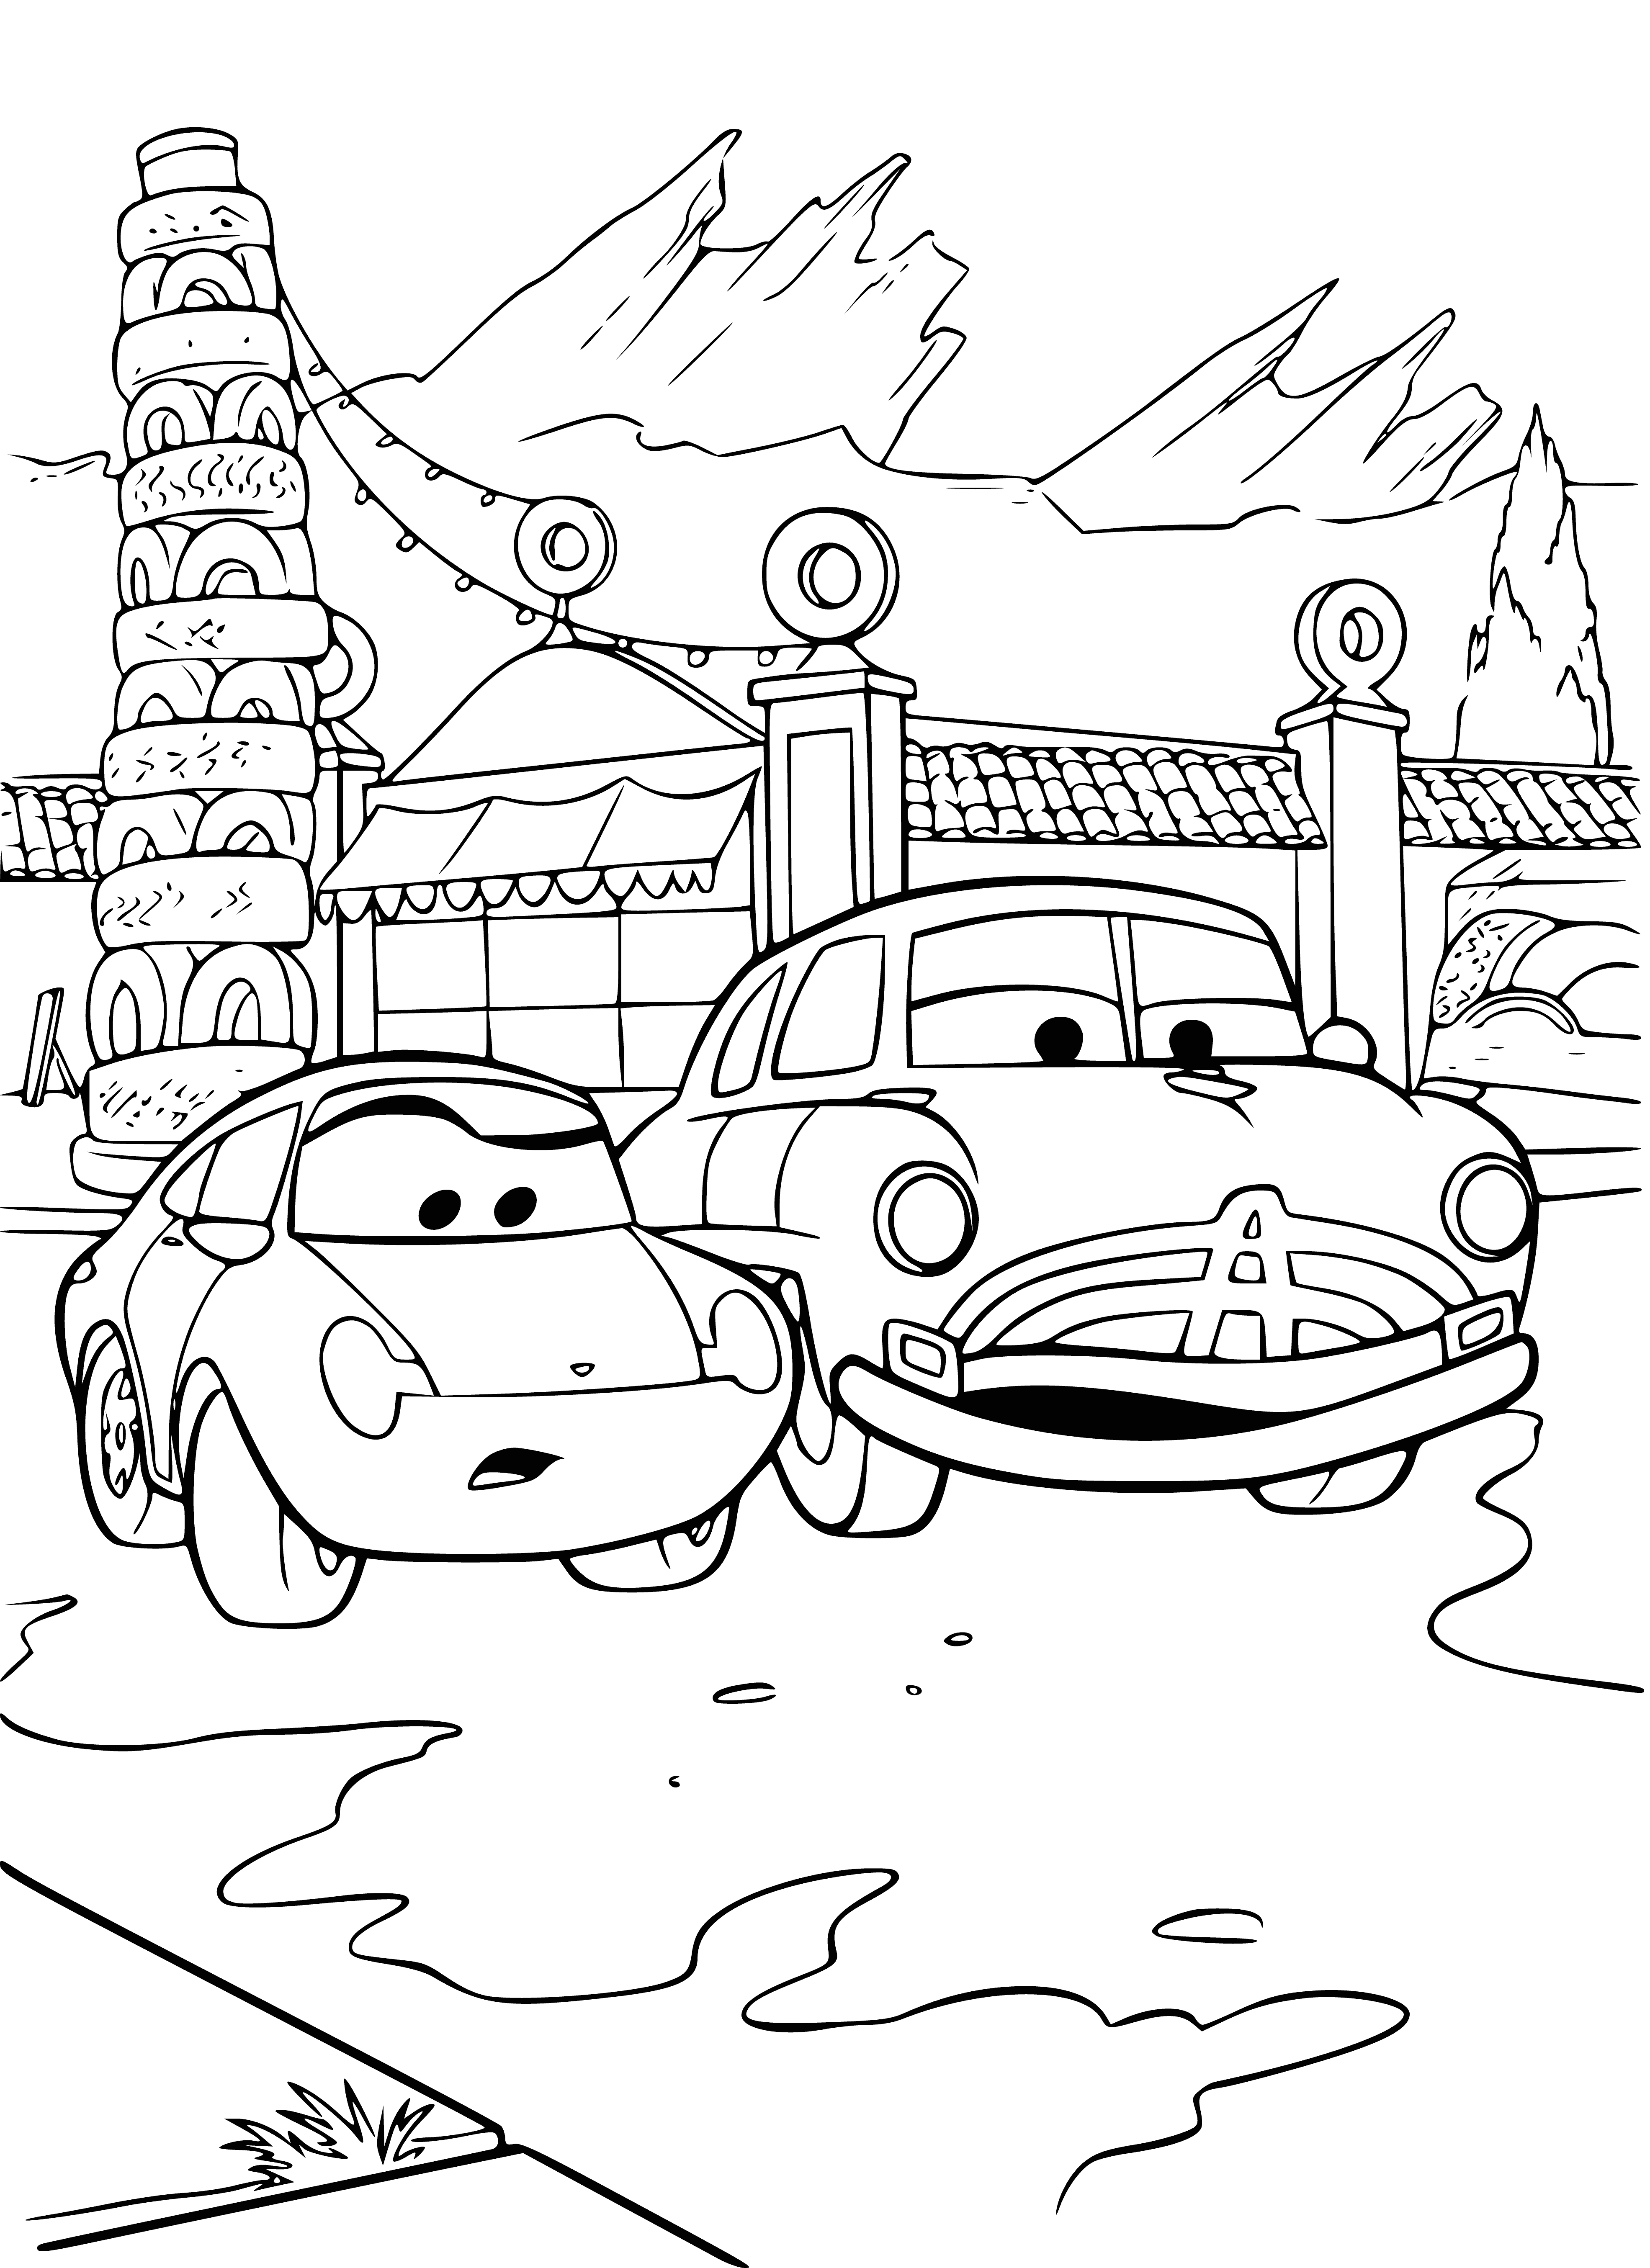 Sally and Hudson coloring page